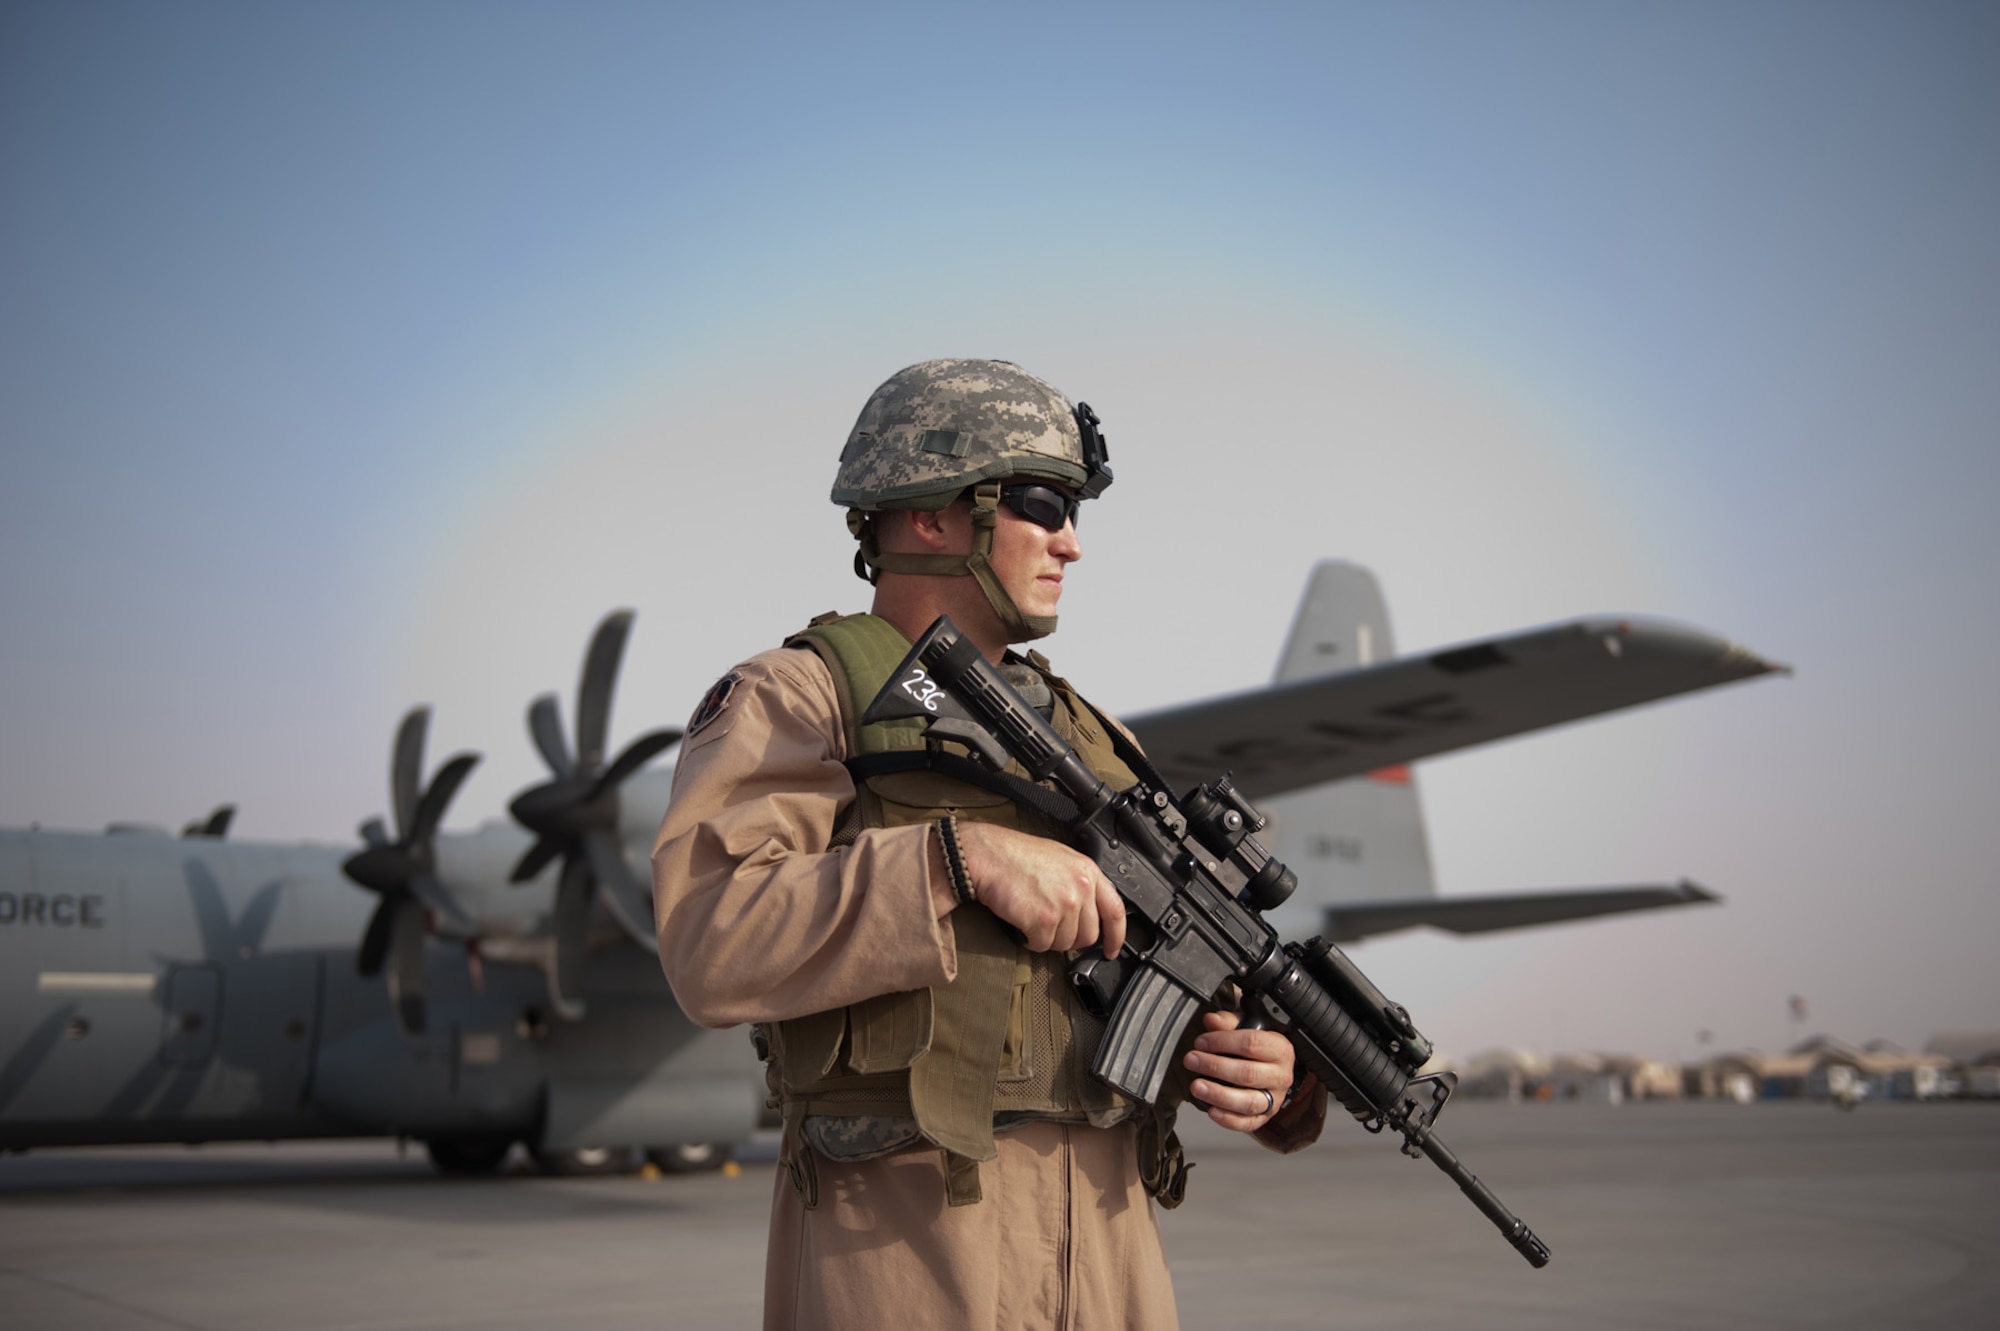 Airman 1st Class Dustin Wiley, 379th Expeditionary Security Forces Squadron Fly Away Security Team member, secures the area around a C-130, Oct. 6, in Southwest Asia. Airman Wiley, along with fellow FAST members, ensures U.S. Air Force aircraft are secure when they travel to areas with less established security. Airman Wiley is deployed from RAF Mildenhall, England, in support of Operations Iraqi and Enduring Freedom. (U.S. Air Force photo/Staff Sgt. Robert Barney) 